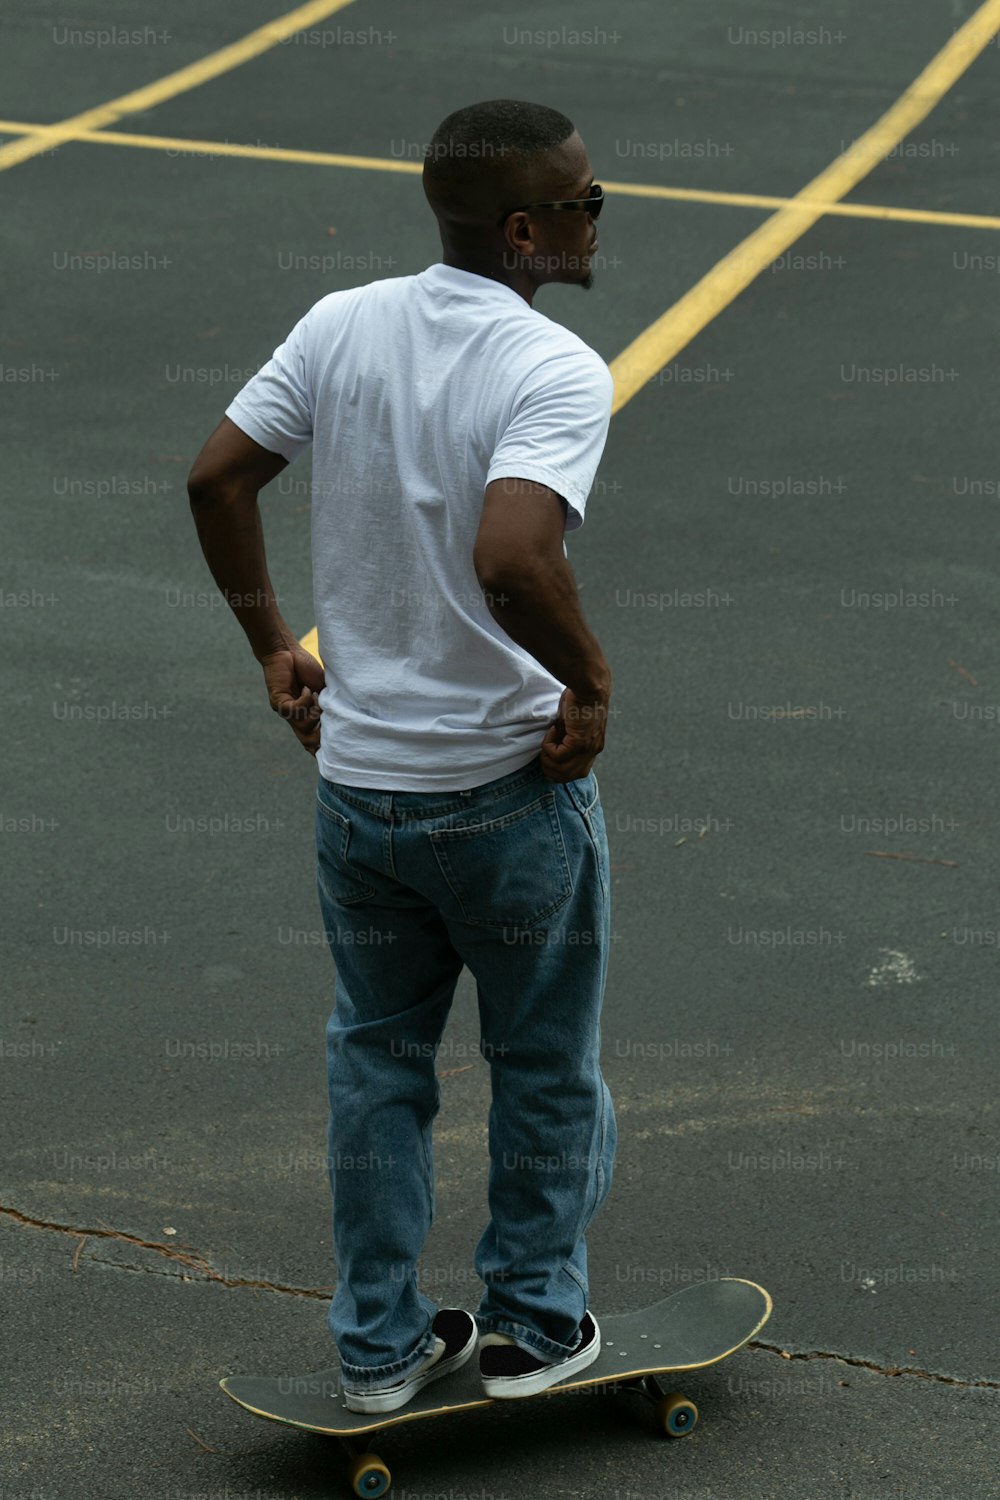 a man standing on a skateboard in a parking lot